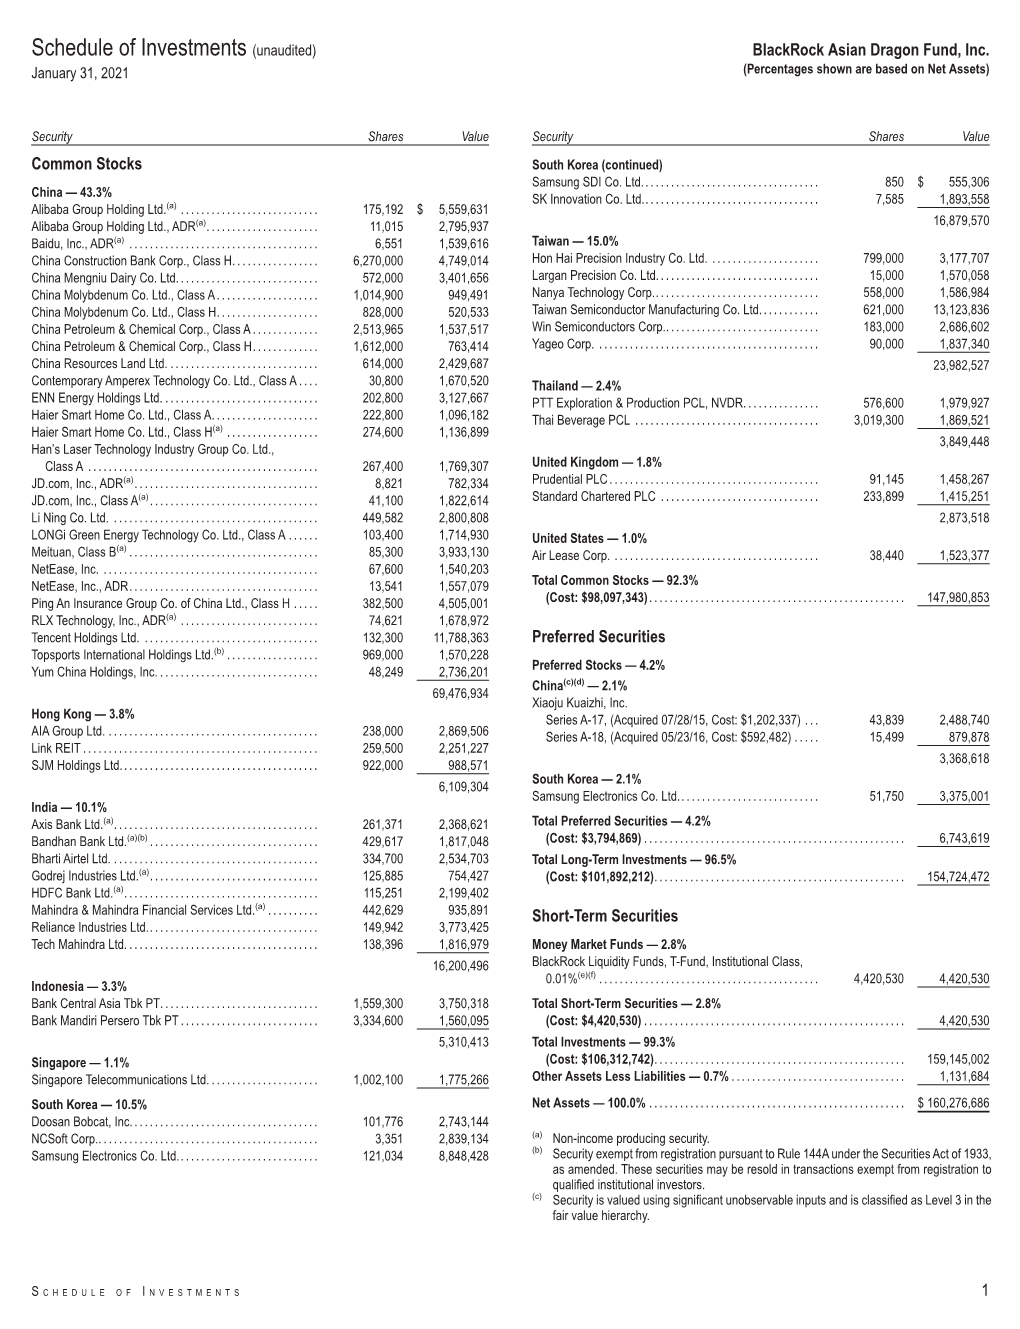 Schedule of Investments (Unaudited) Blackrock Asian Dragon Fund, Inc